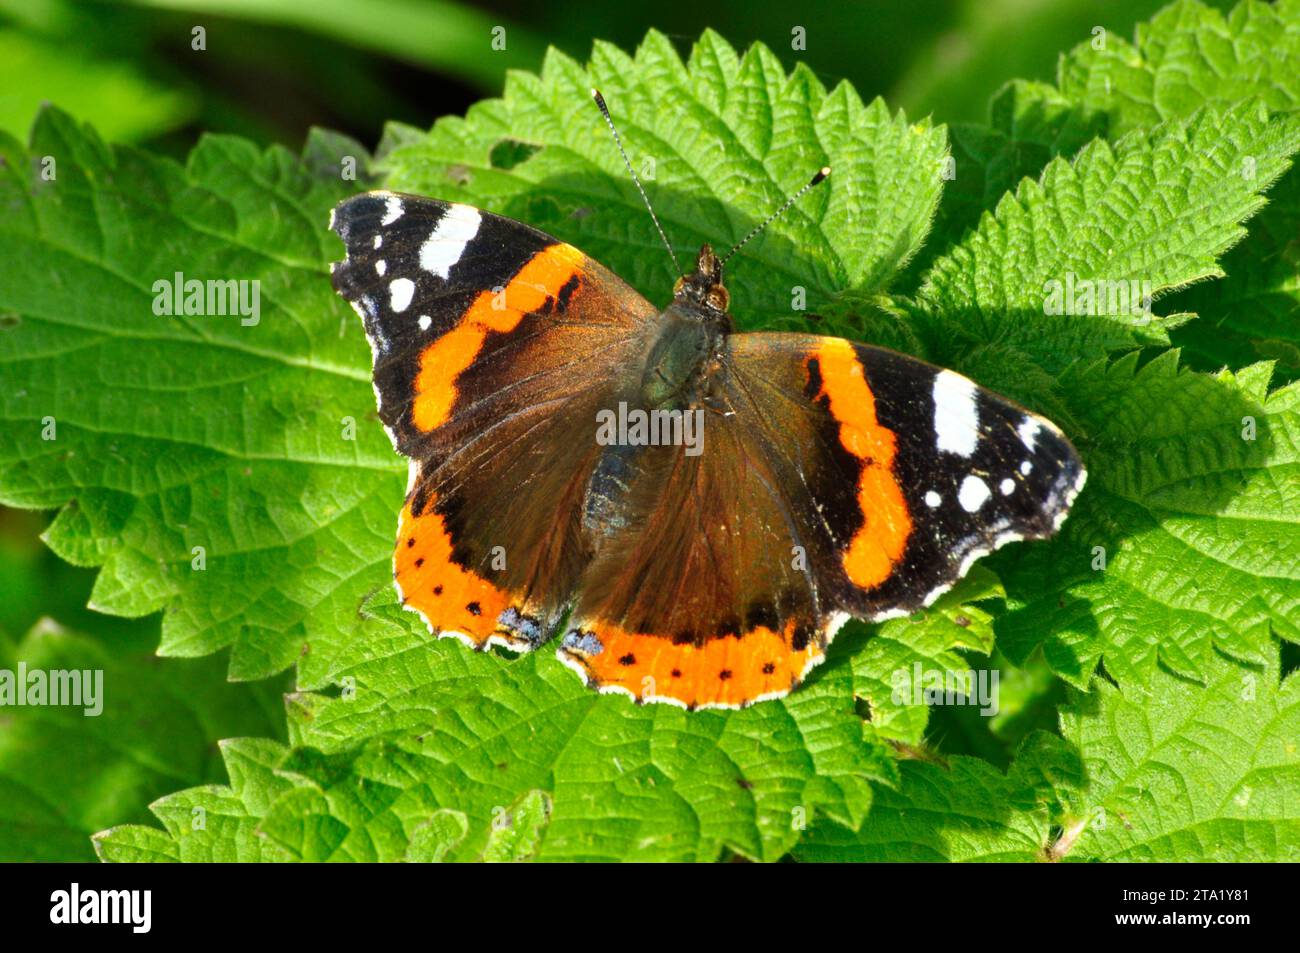 A Red Admiral 'Vanessa atalanta' basking in the autumn sunshine on a stinging nettle 'Urtica dioica' in a nature reserve on the Somerset Levels. Stock Photo